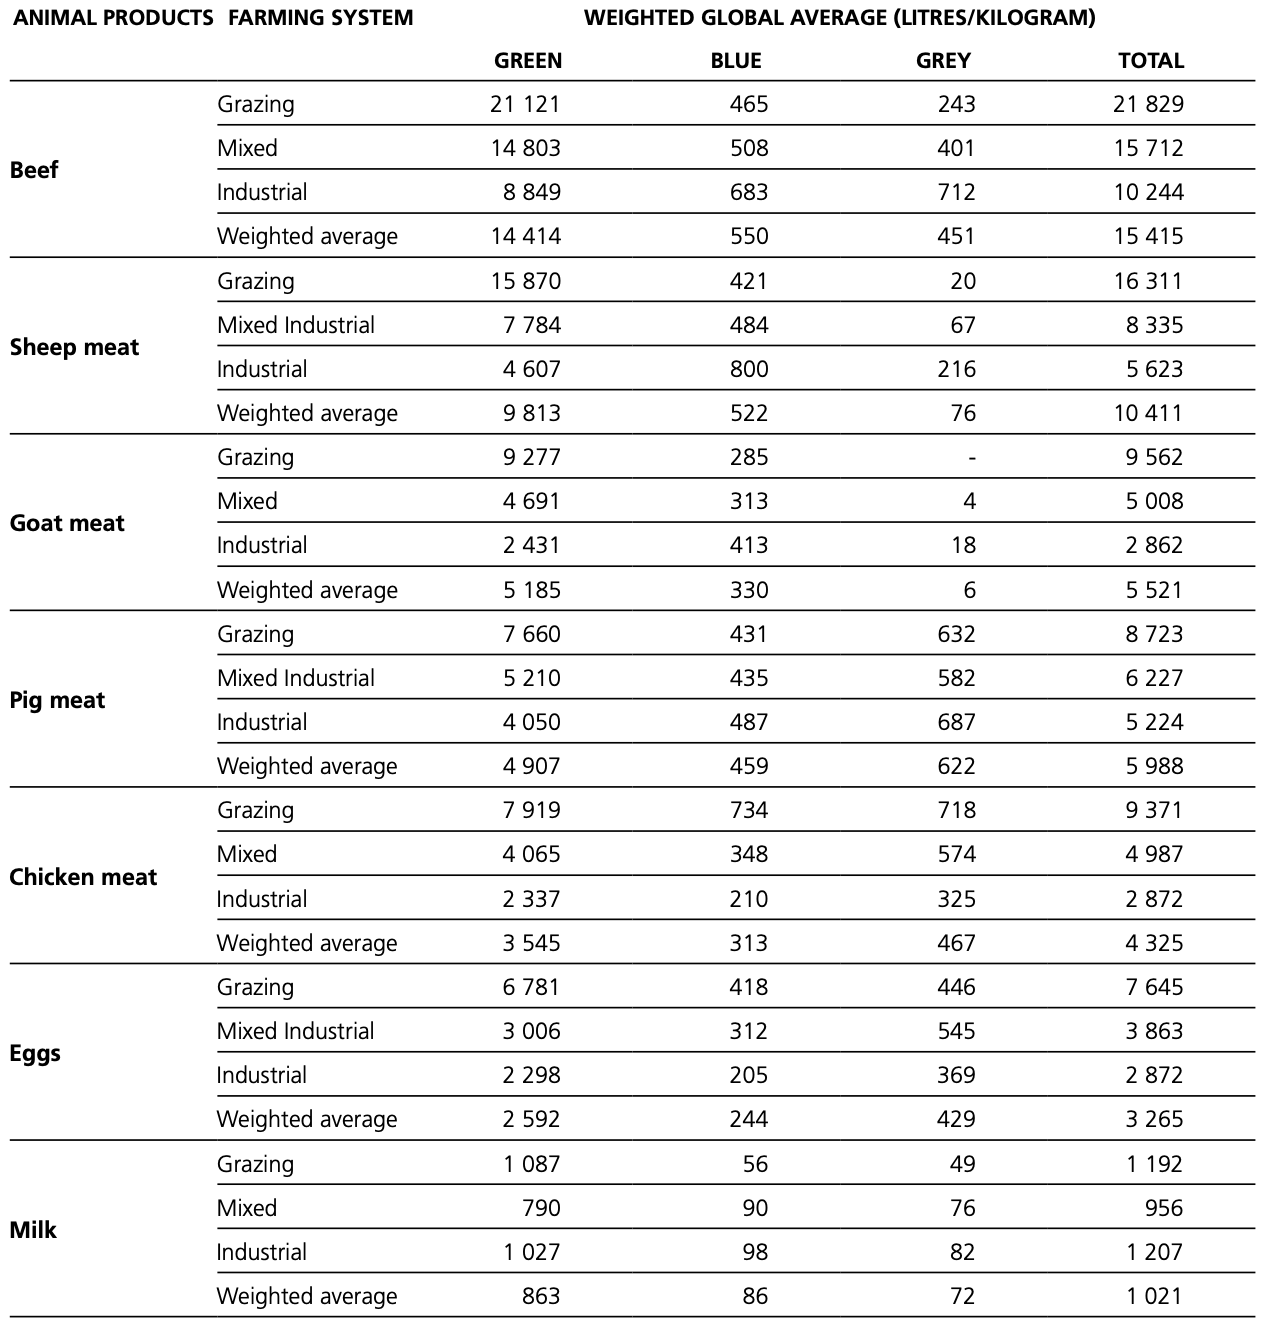 Water footprint values reported for selected food products (Mekonnen and Hoekstra, 2012).